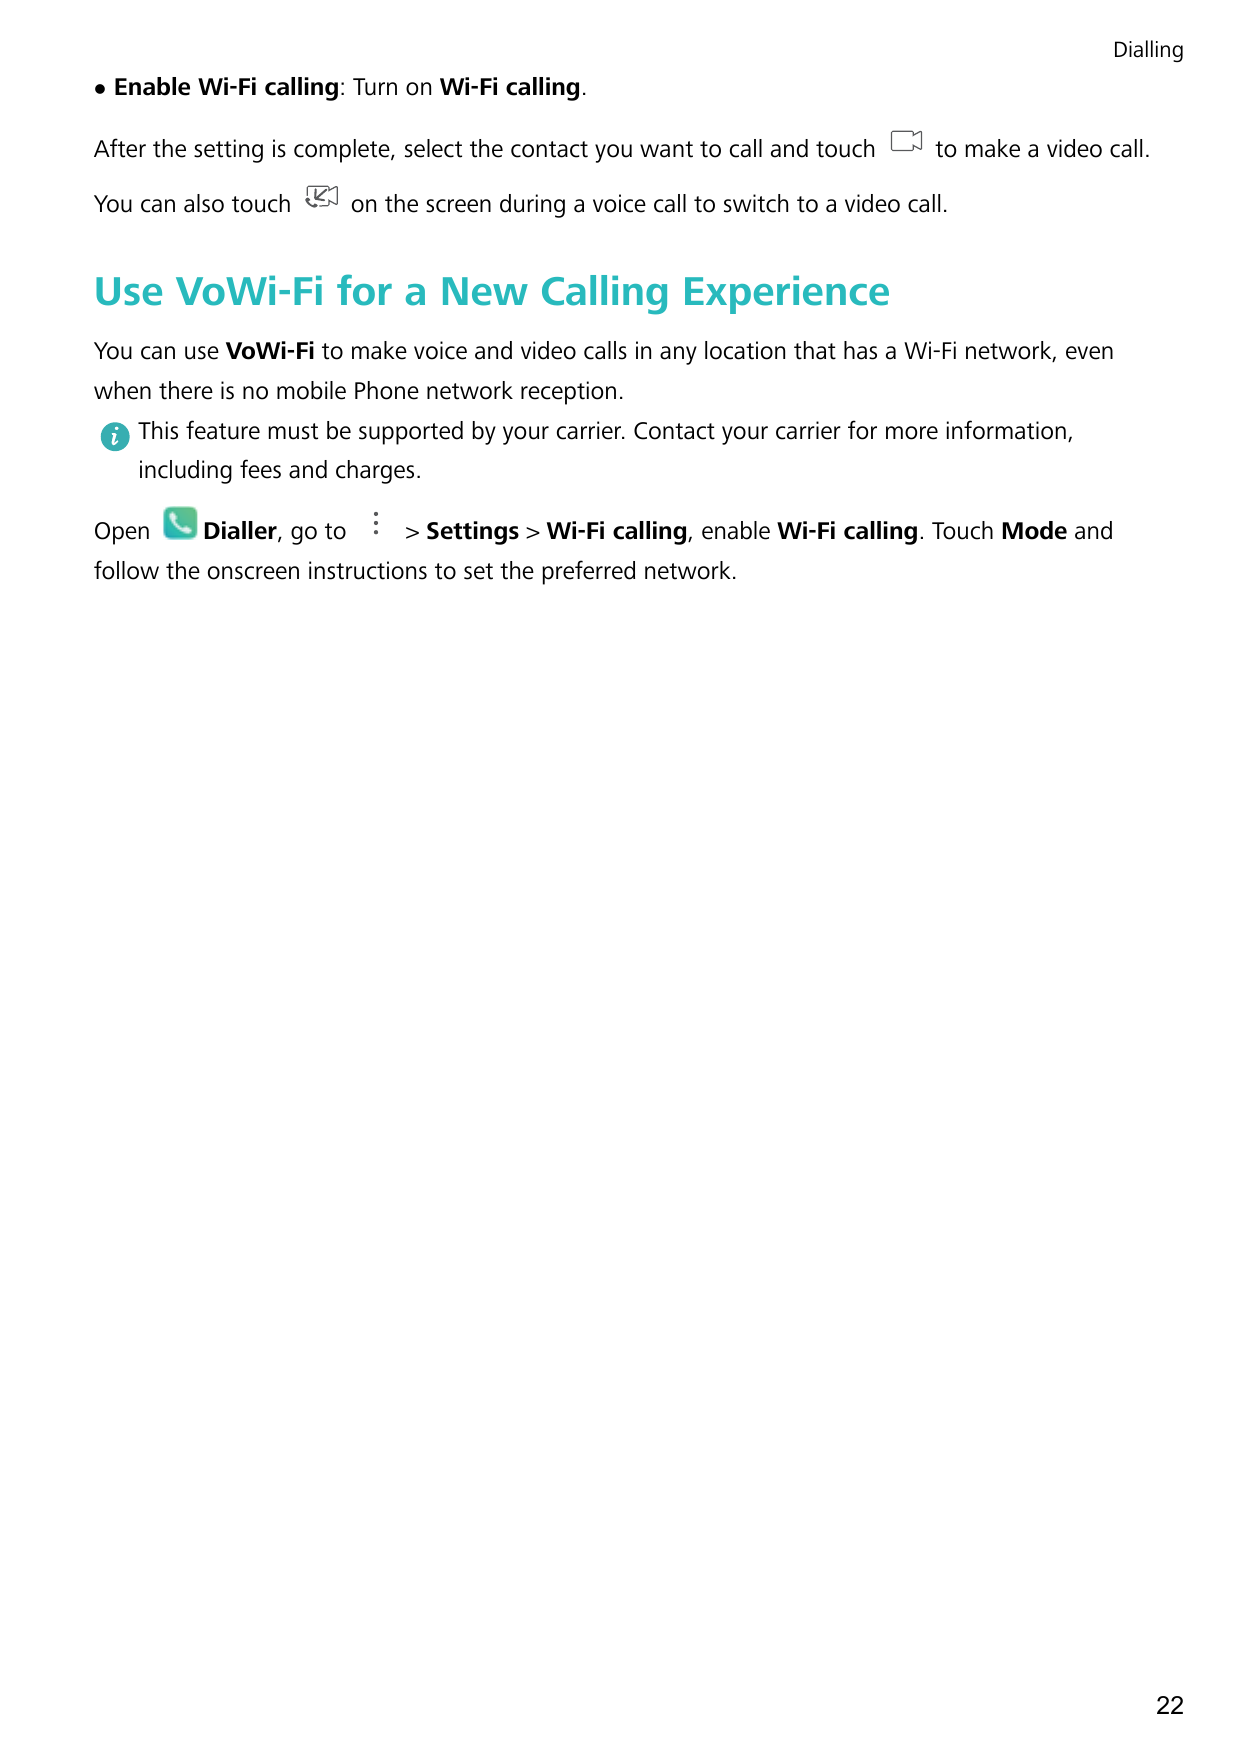 DiallinglEnable Wi-Fi calling: Turn on Wi-Fi calling.After the setting is complete, select the contact you want to call and touc